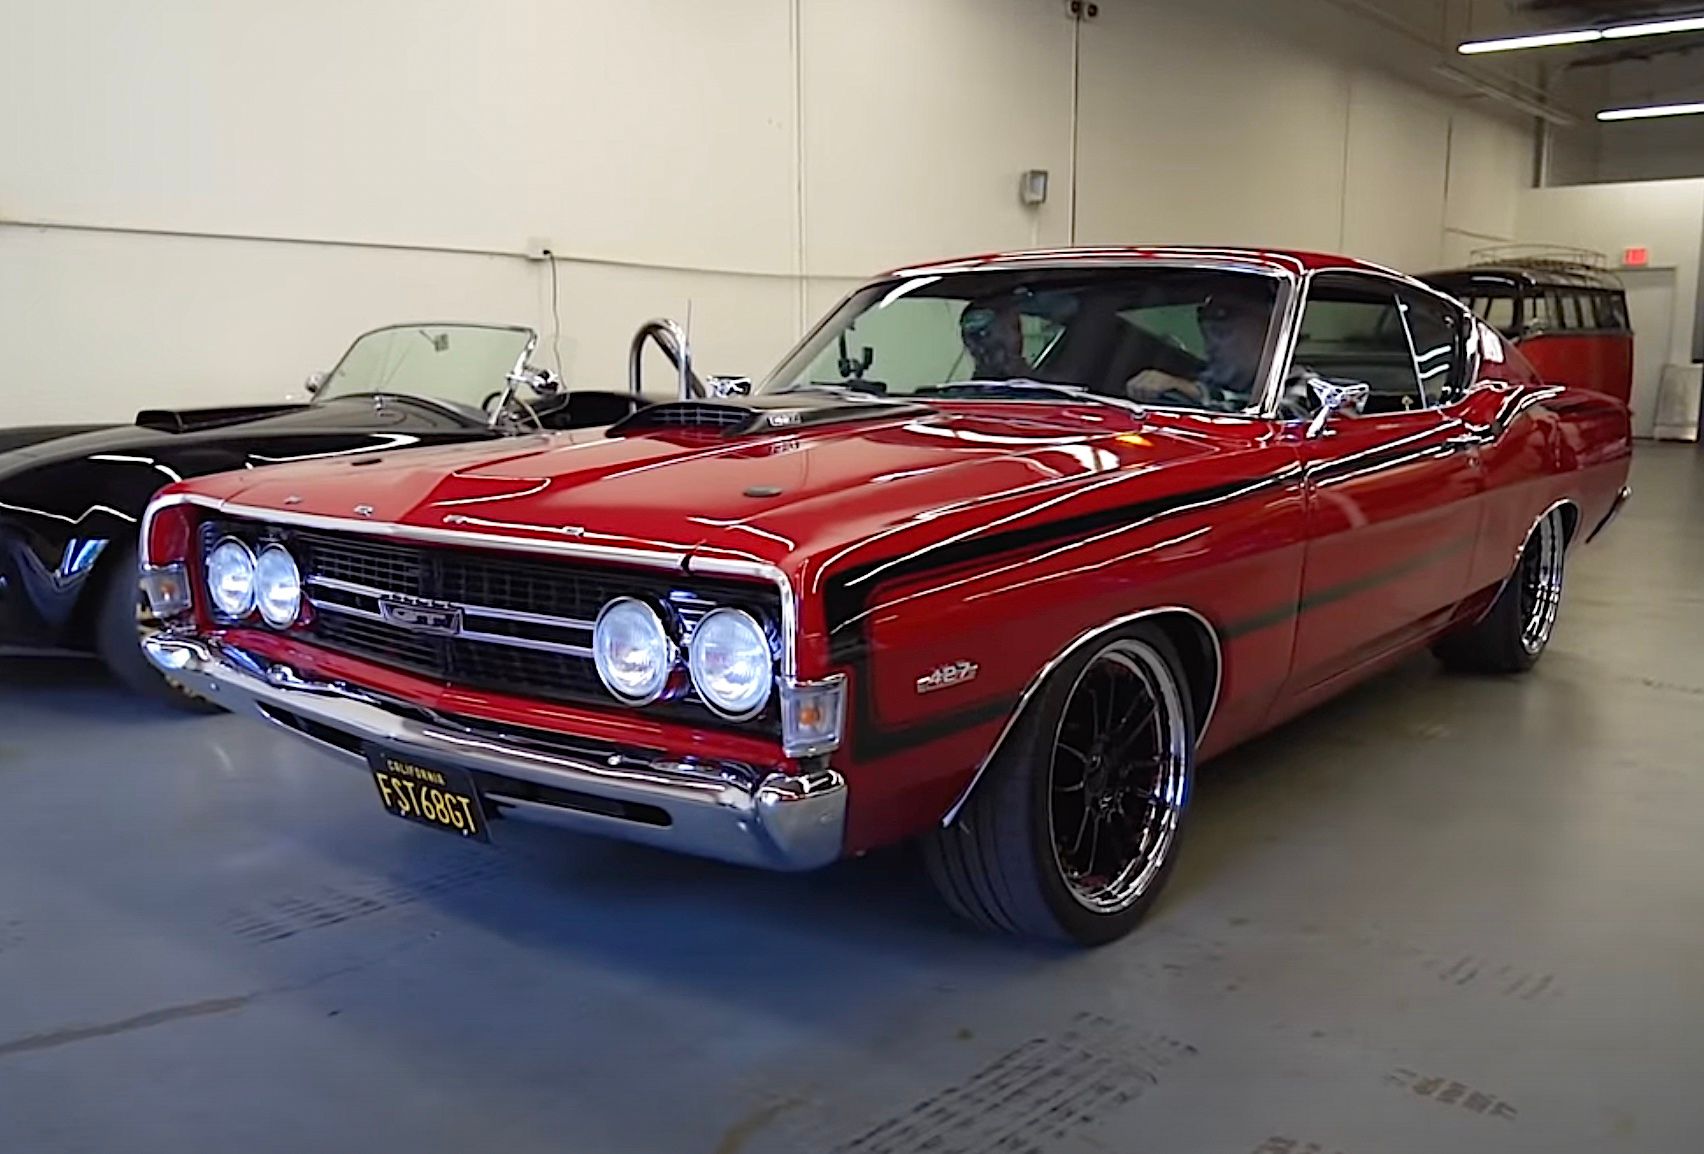 Ford Torino Restomod Is Air Bagged and Tubbed